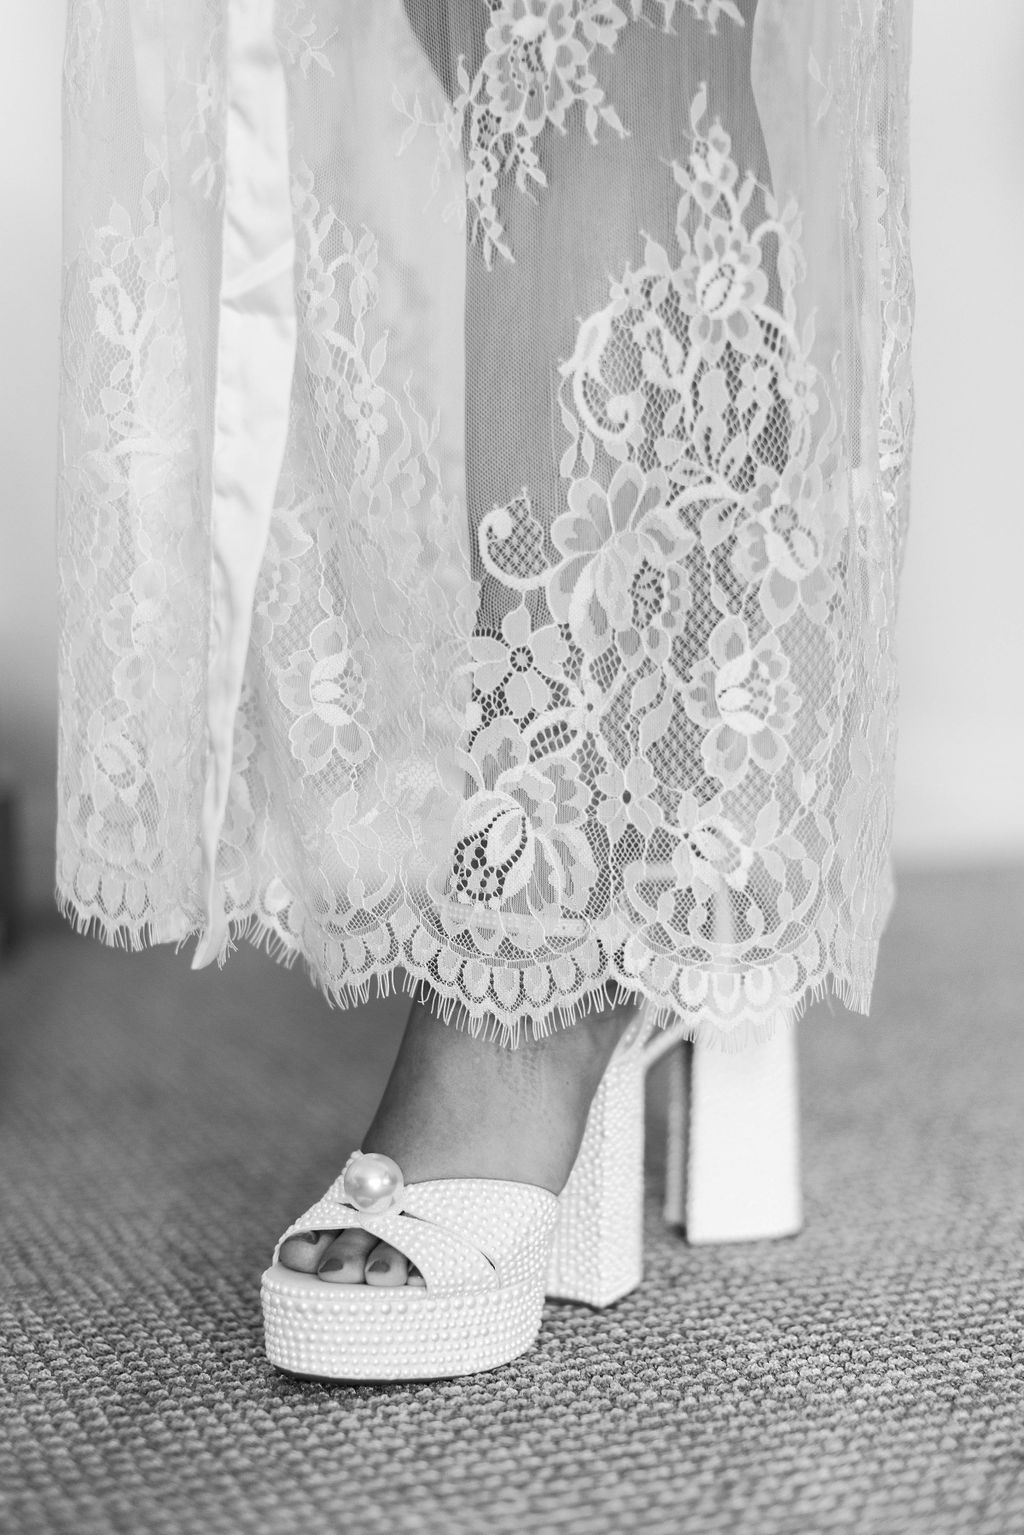 Brides leg showing edge of wedding gown with lace scalloped edges and eyelashes to soften the silhouette with her pearl sandals in a black and white photo at Mission Santa Barbara wedding | Photo by Sarah Block Photography